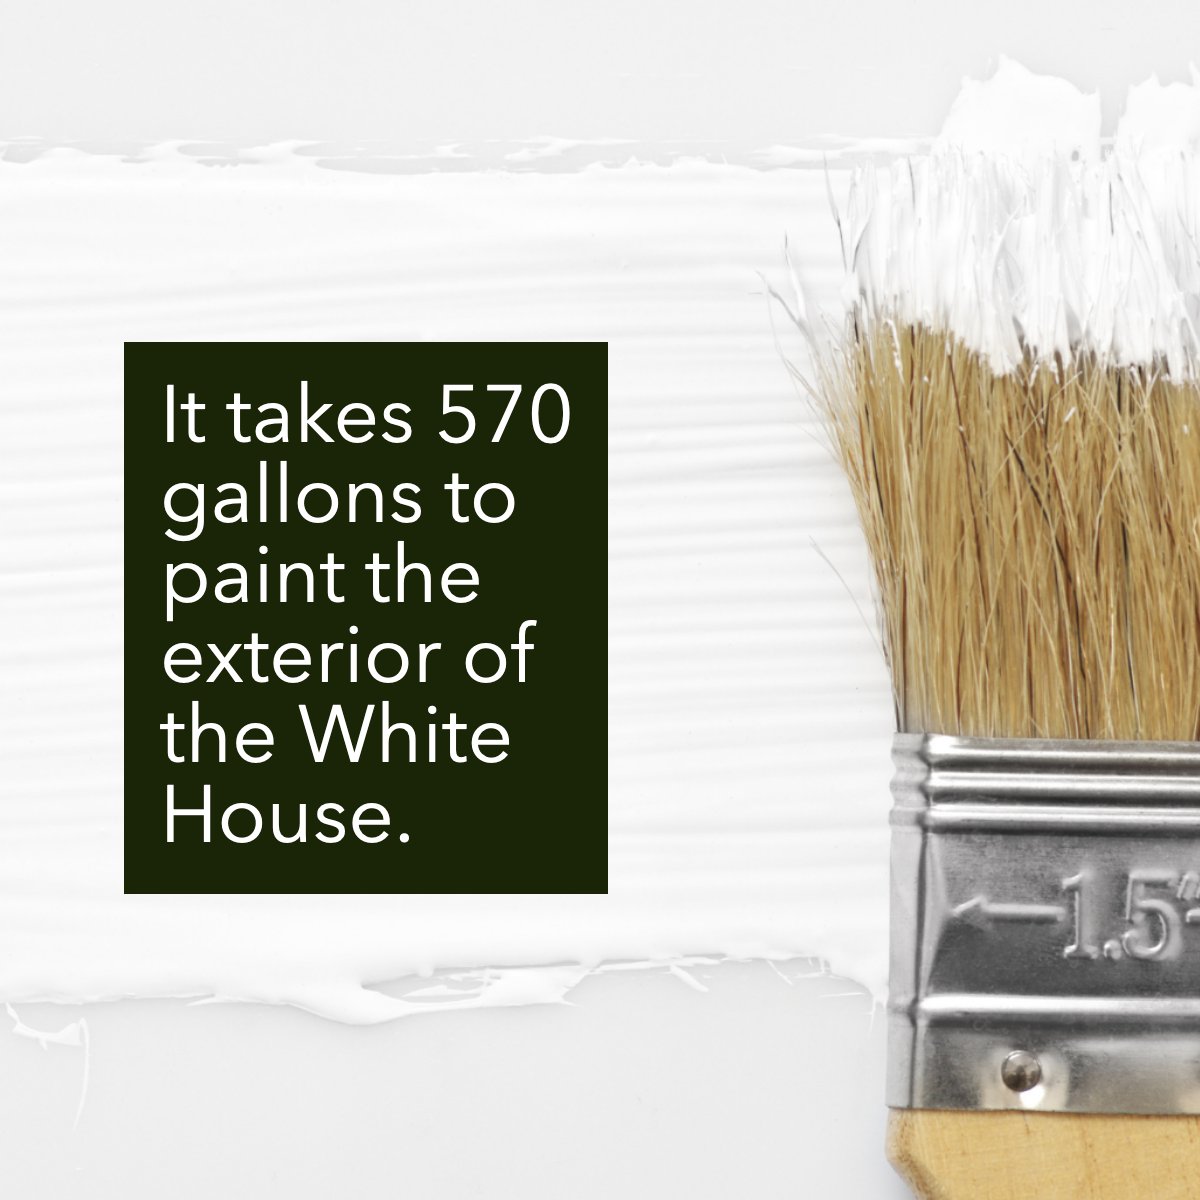 Did you know this? 😮 #whitepaint #paint #exterior #whitehouse